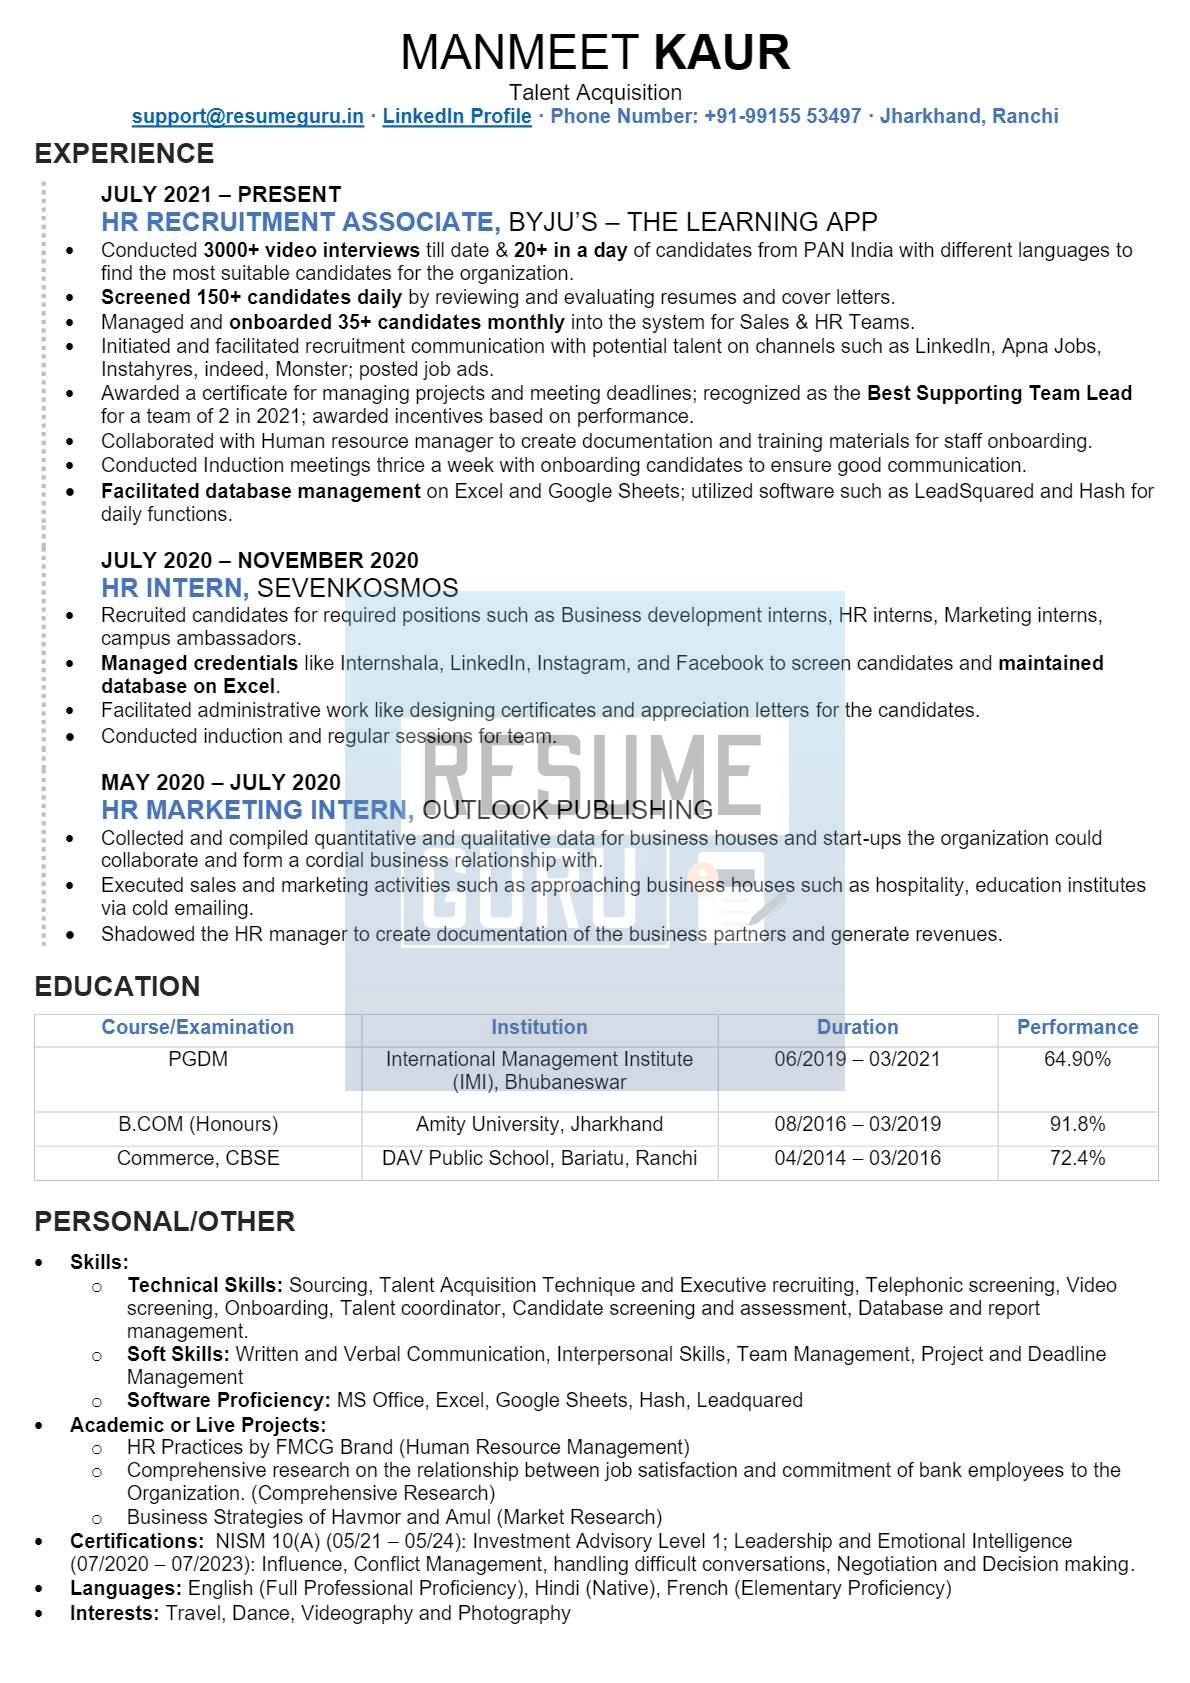 Fresher Level HR and Talent Acquisition Resume Sample_1